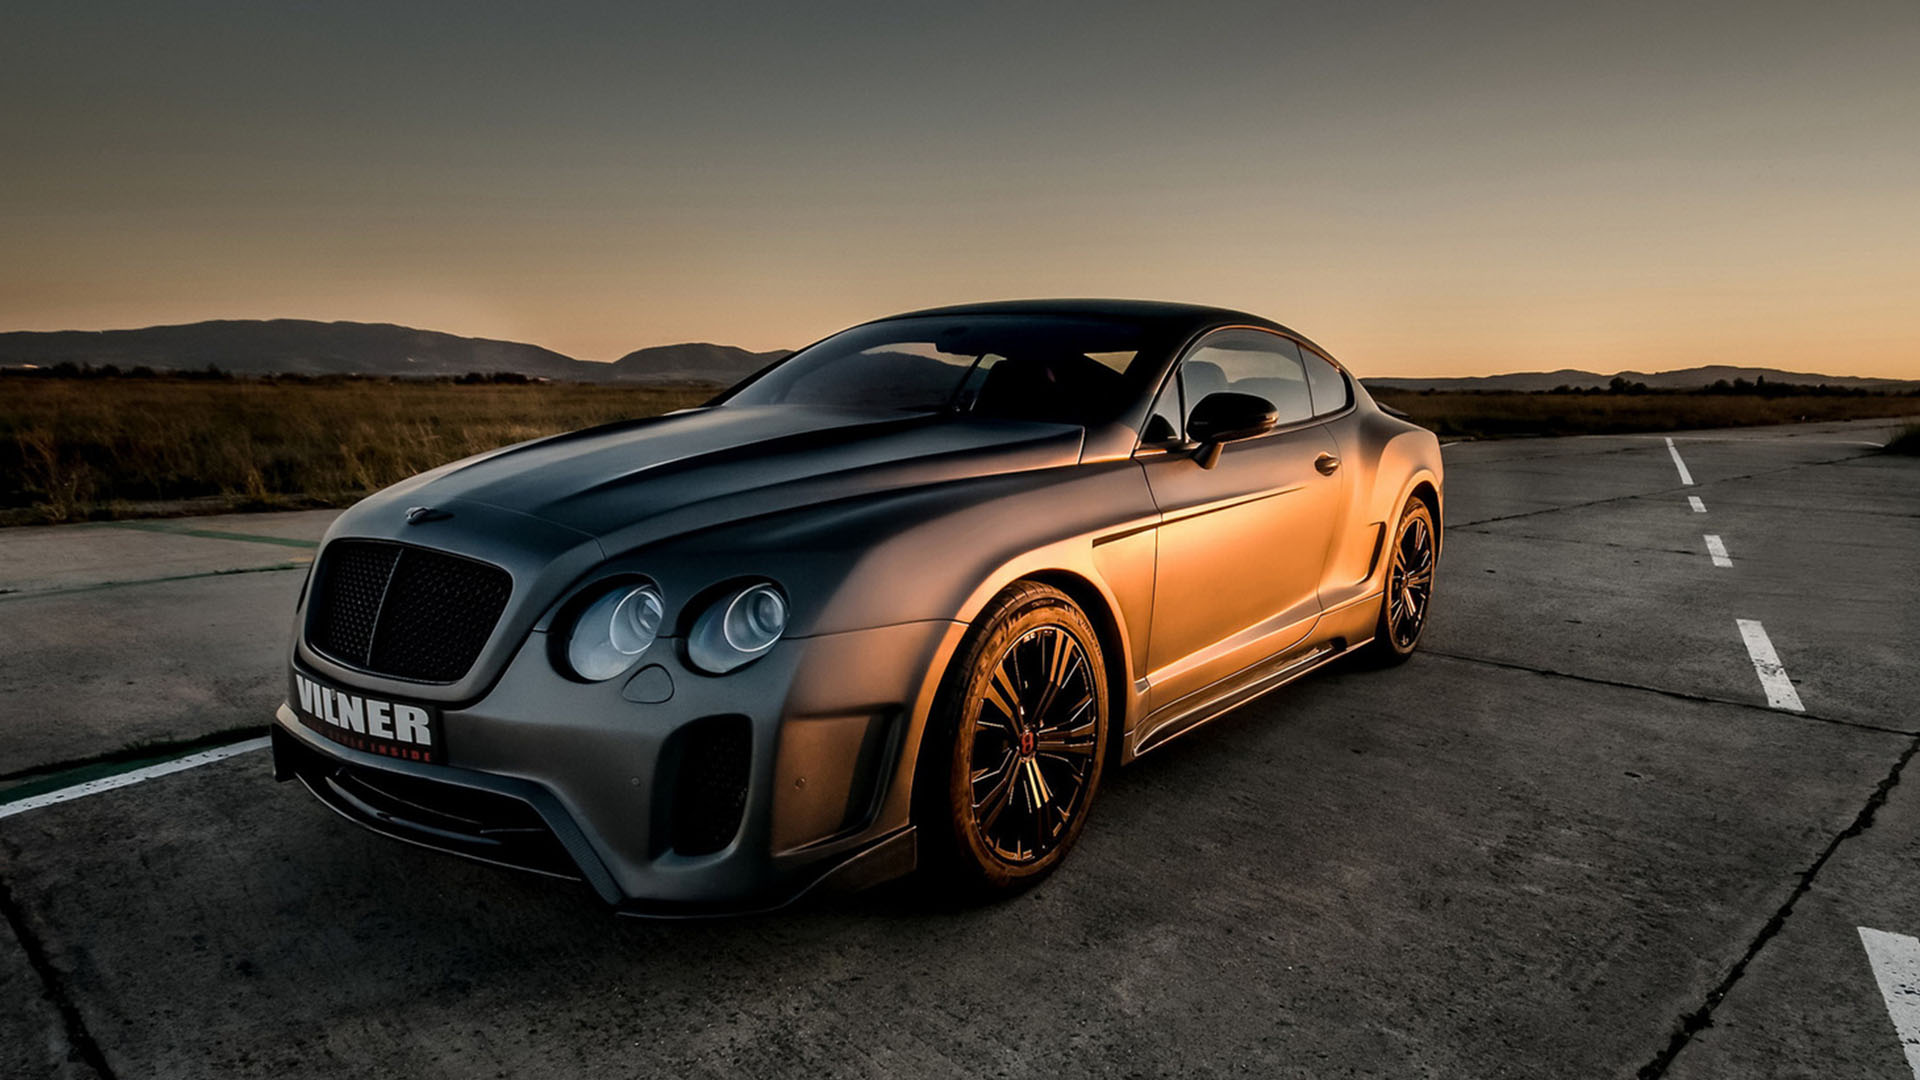 car background wallpaper,land vehicle,vehicle,car,luxury vehicle,bentley continental gt